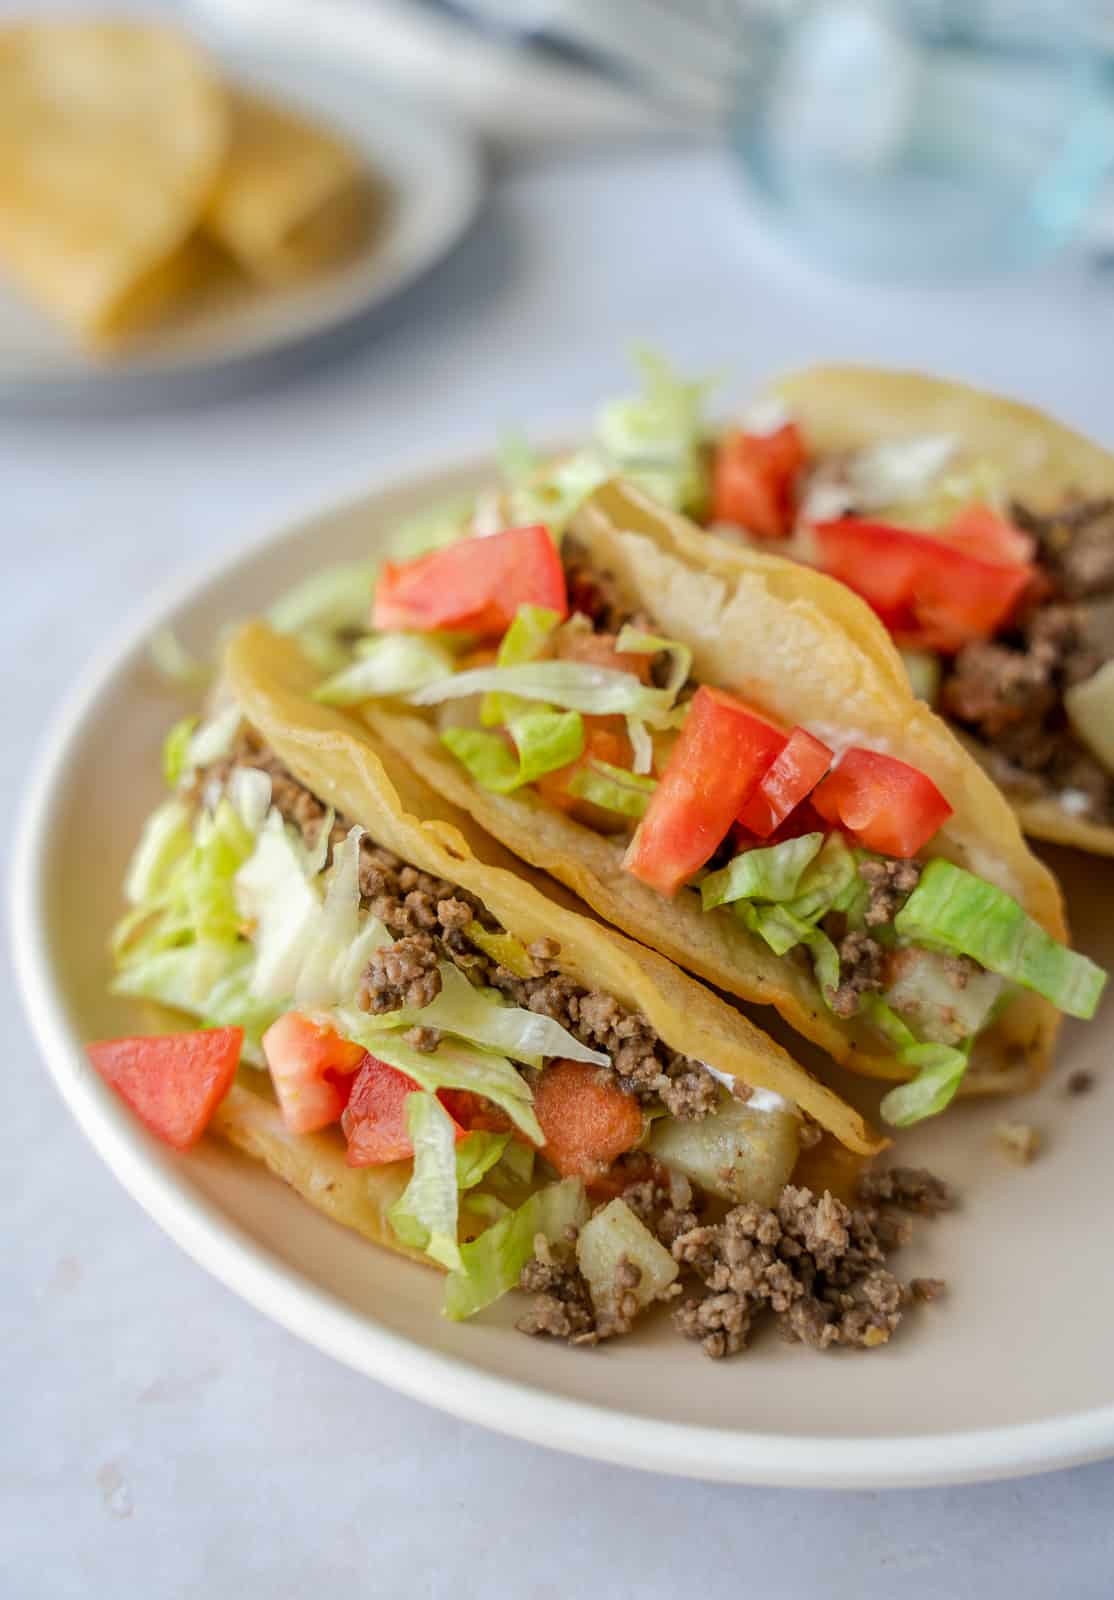 Up close view of crispy Mexican picadillo tacos on a plate.